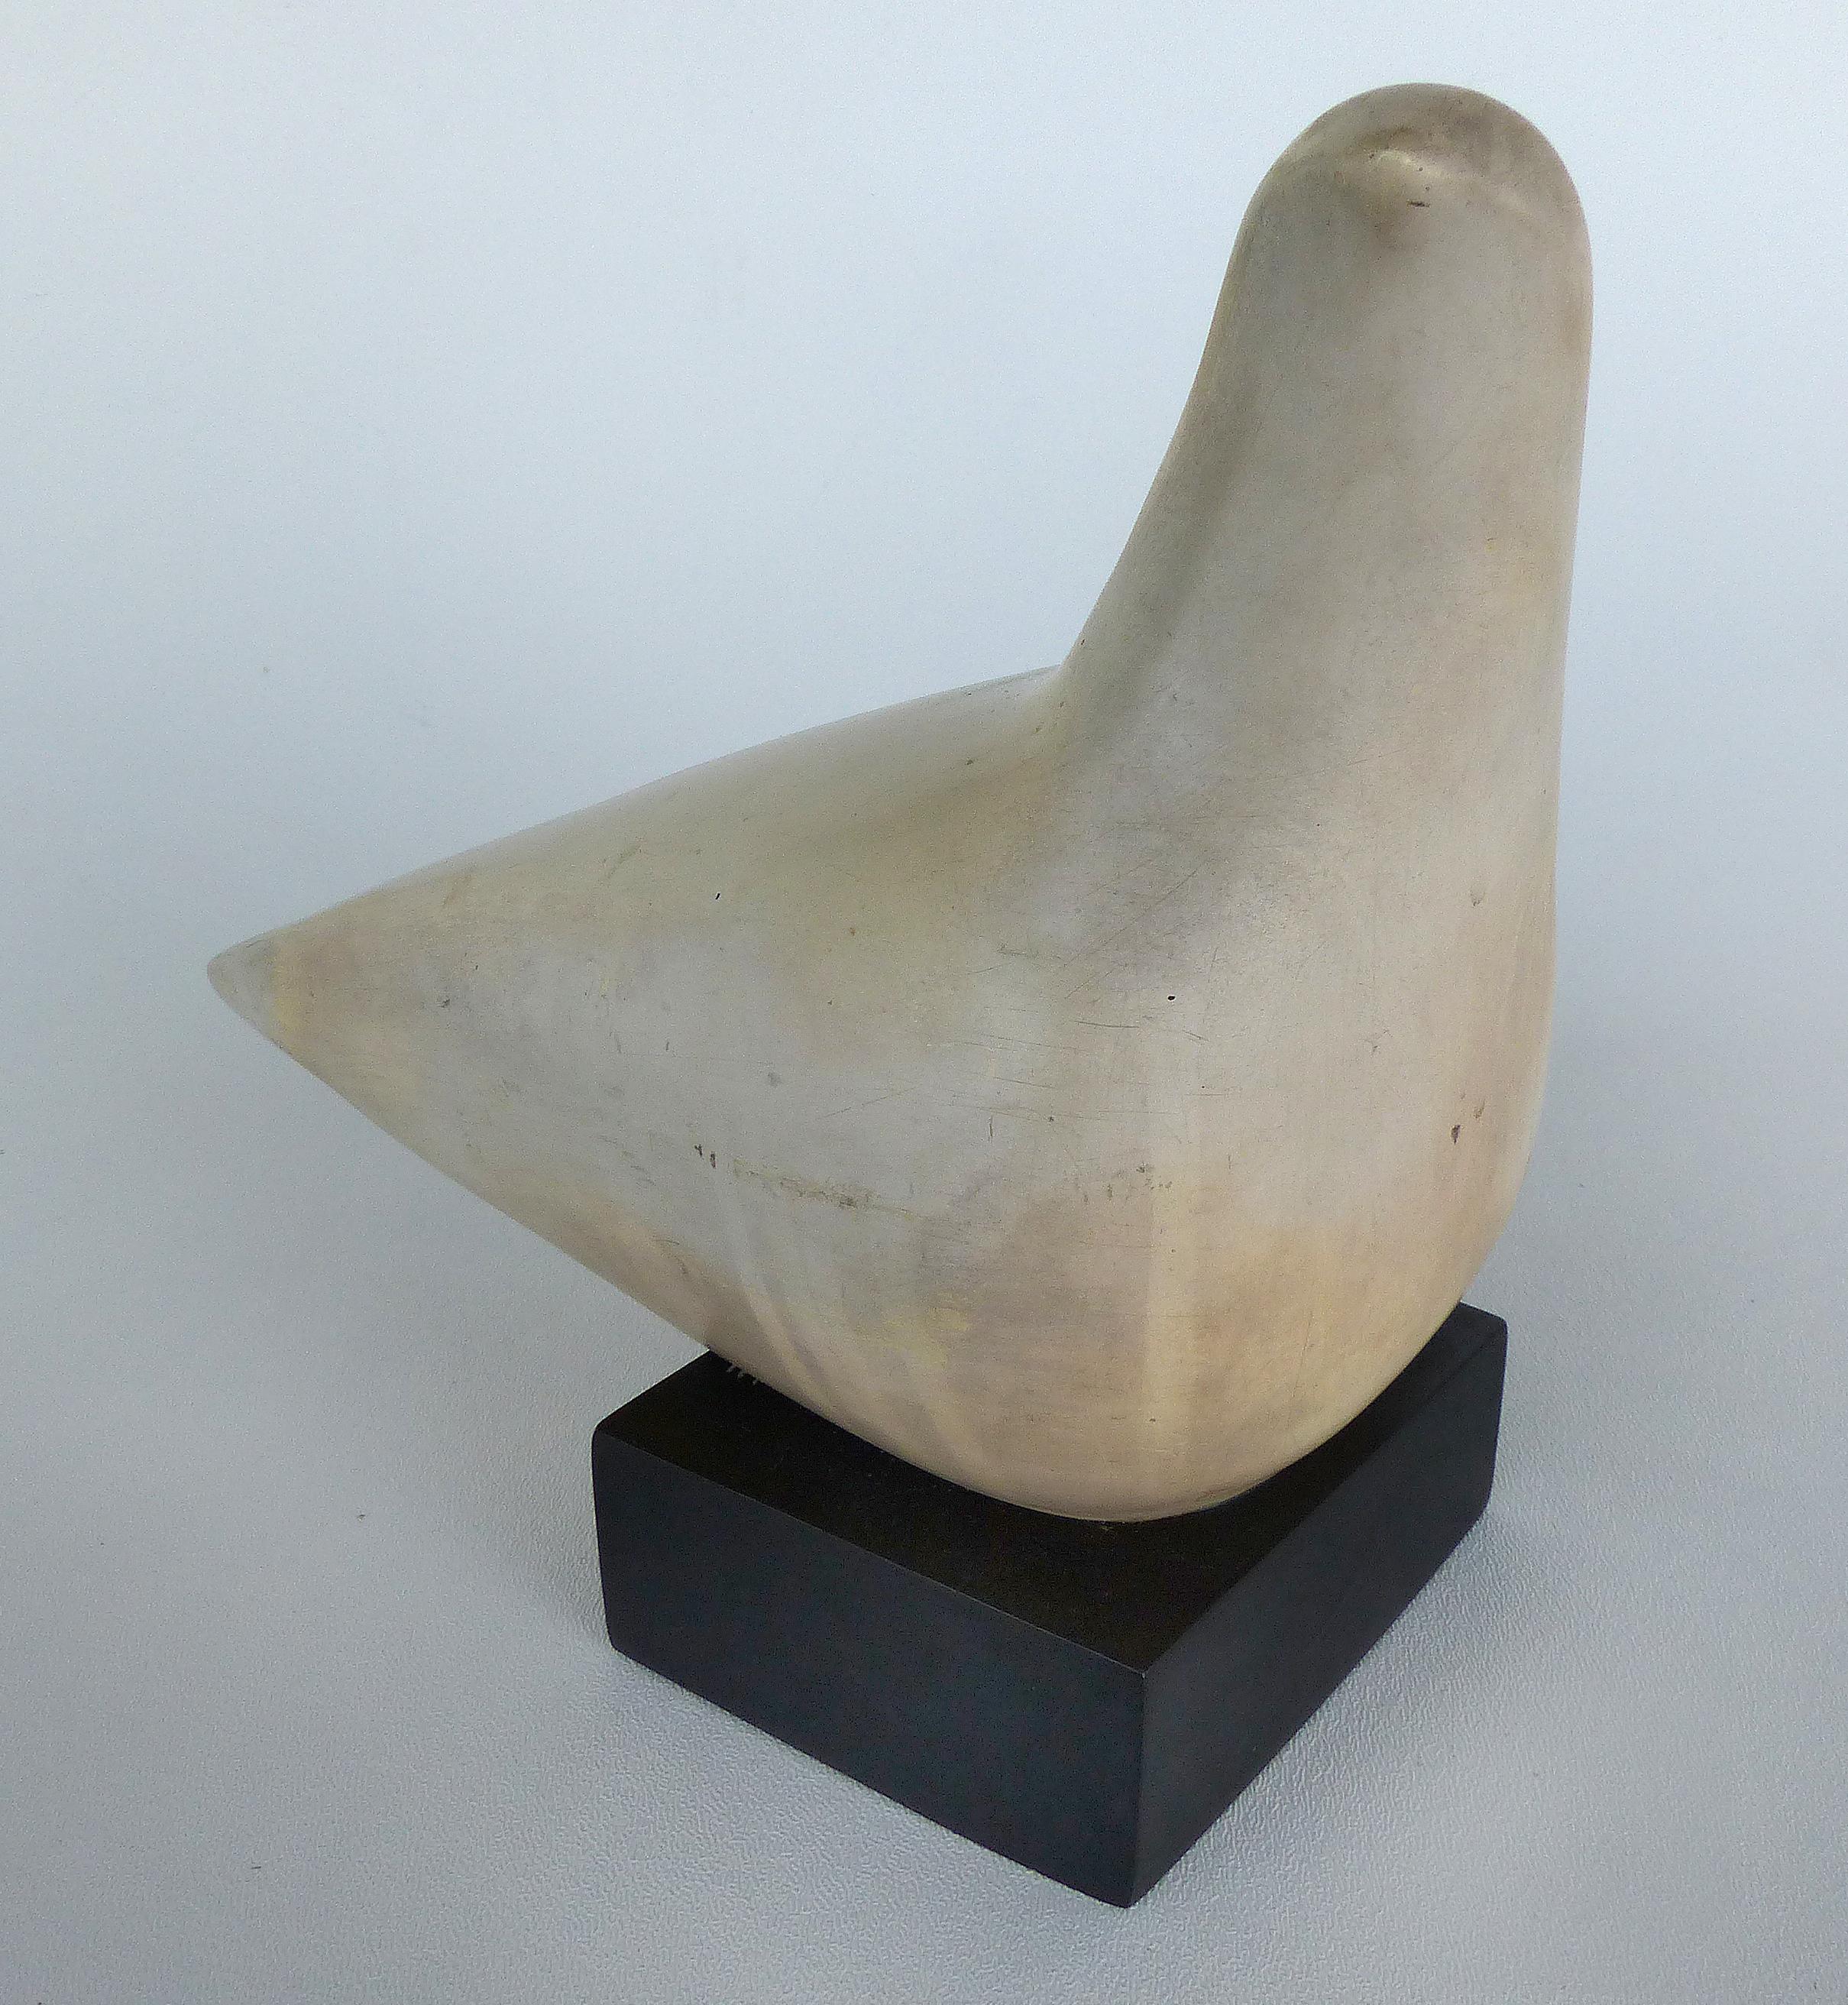 Cleo Hartwig dove sculpture

Offered for sale is a Mid-Century Modern sculpture of a resin dove on a square base by American artist Cleo Hartwig. This piece is signed on the underside of the tail. Hartwig belongs to a line of direct carvers which